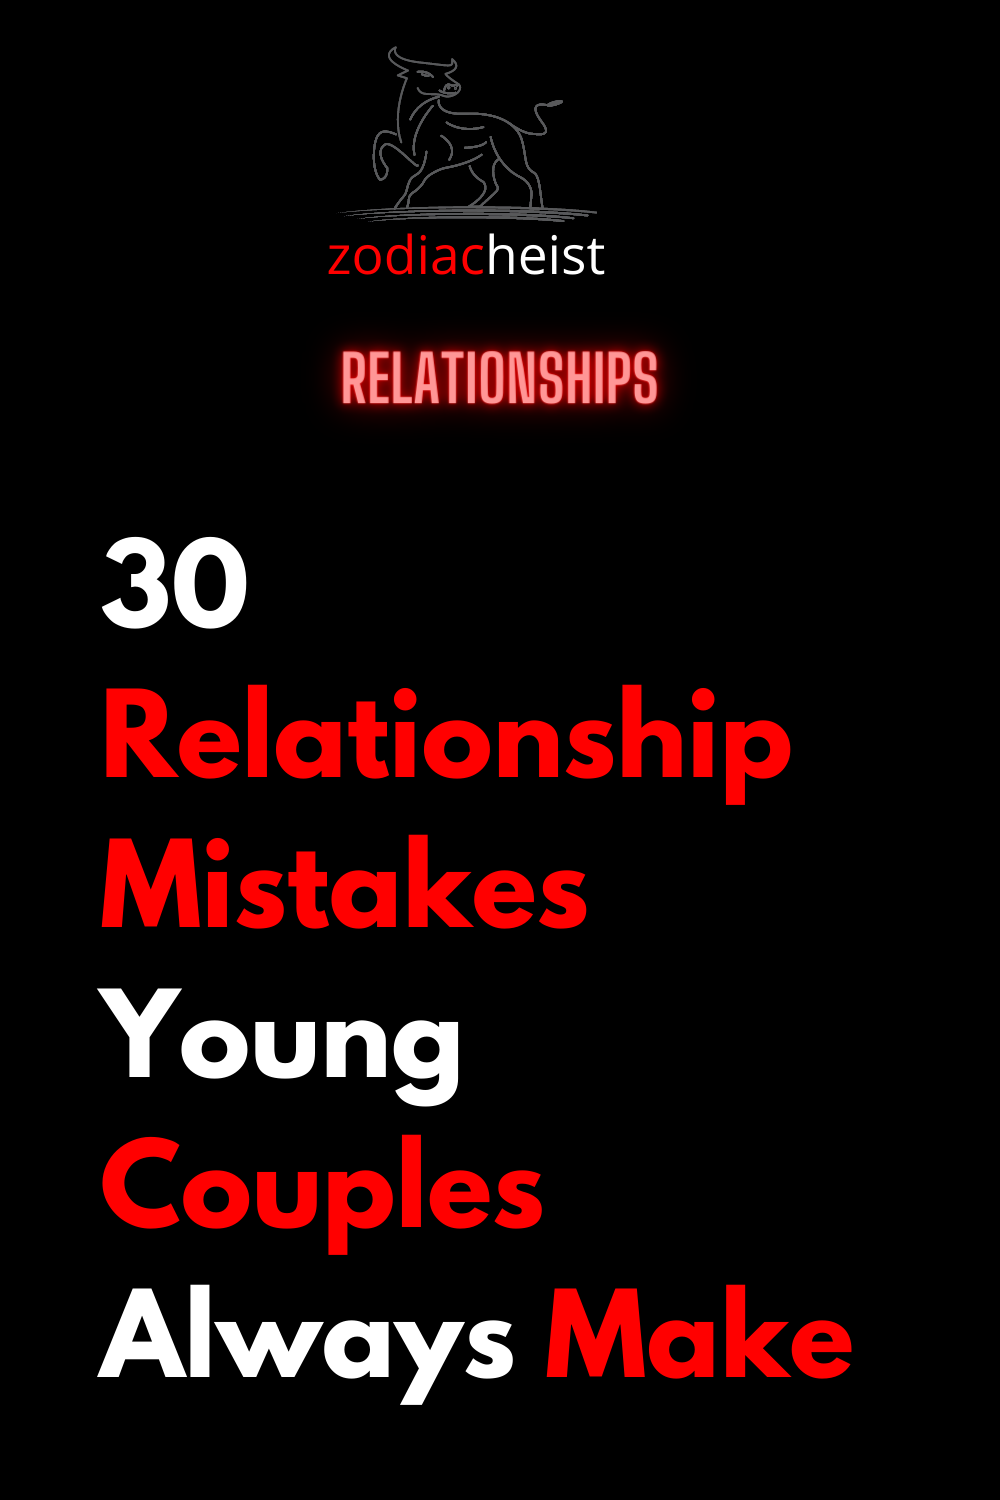 30 Relationship Mistakes Young Couples Always Make